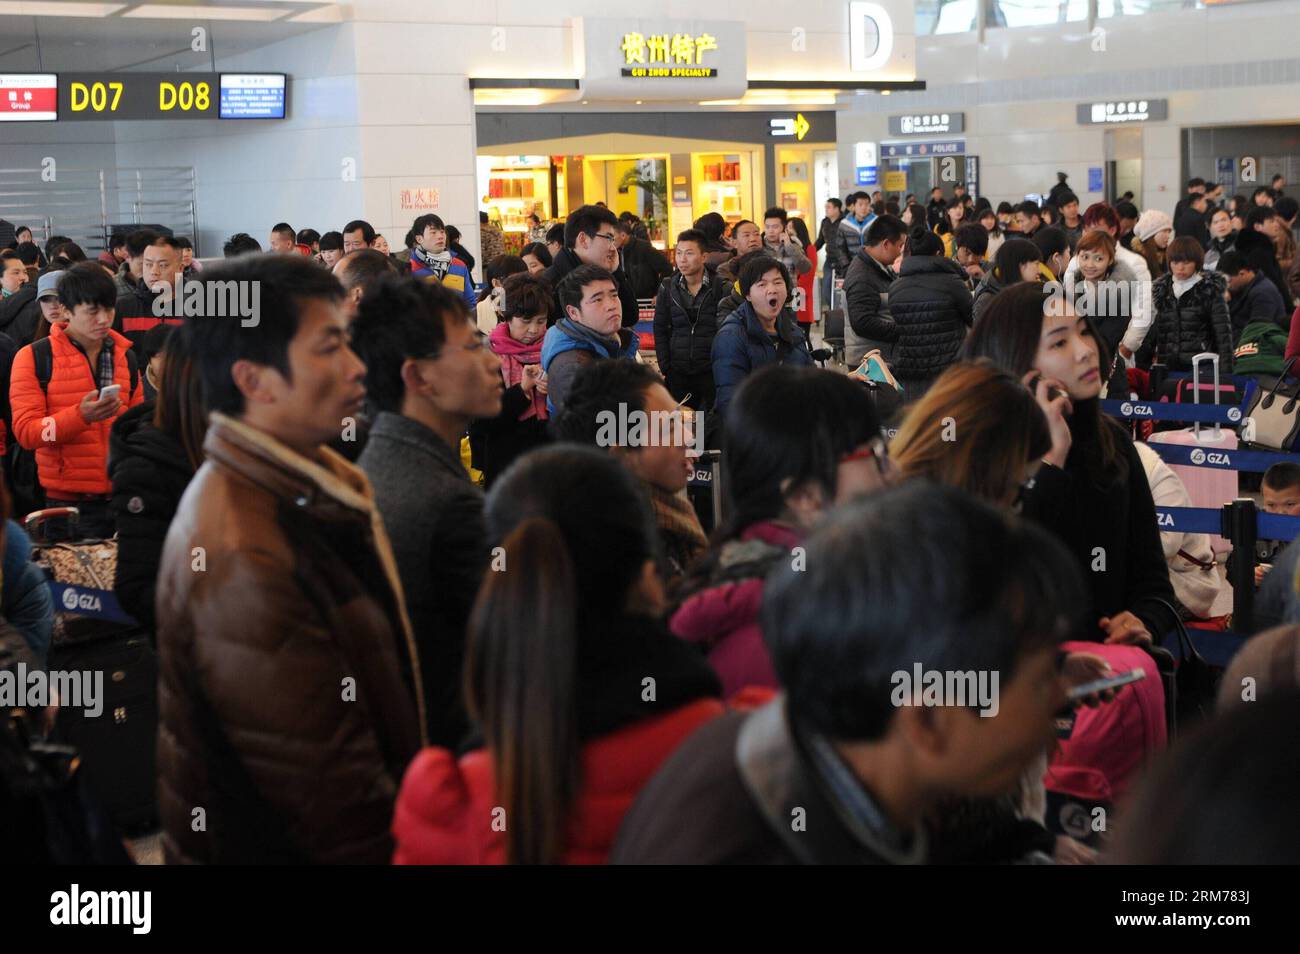 (140218) -- GUIYANG, Feb. 18, 2014 (Xinhua) -- Passengers are stranded at Longdongbao International Airport in Guiyang, capital of southwest China s Guizhou Province, Feb. 18, 2013. Heavy snow led to temporary closure of the airport at 8 a.m. Tuesday for snow and ice removal. More than 90 flights were canceled and over 4,800 passengers were affected before the airport was reopened at noon. (Xinhua/Tao Liang)(wjq) CHINA-GUIZHOU-SNOW-AIRPORT CLOSURE (CN) PUBLICATIONxNOTxINxCHN   Guiyang Feb 18 2014 XINHUA Passengers are stranded AT Longdongbao International Airport in Guiyang Capital of Southwes Stock Photo